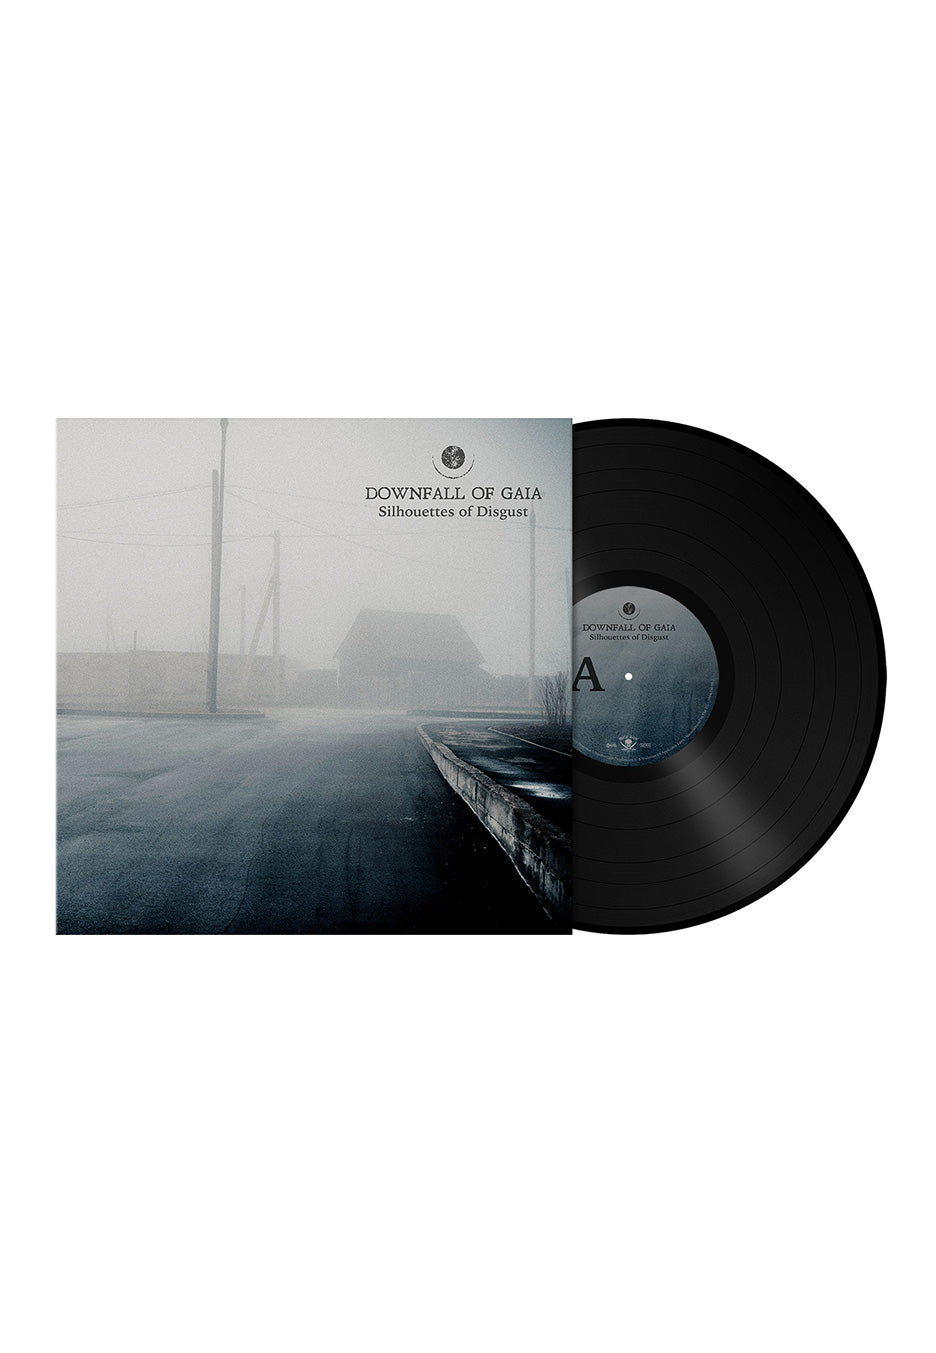 Downfall Of Gaia - Silhouettes Of Disgust - Vinyl